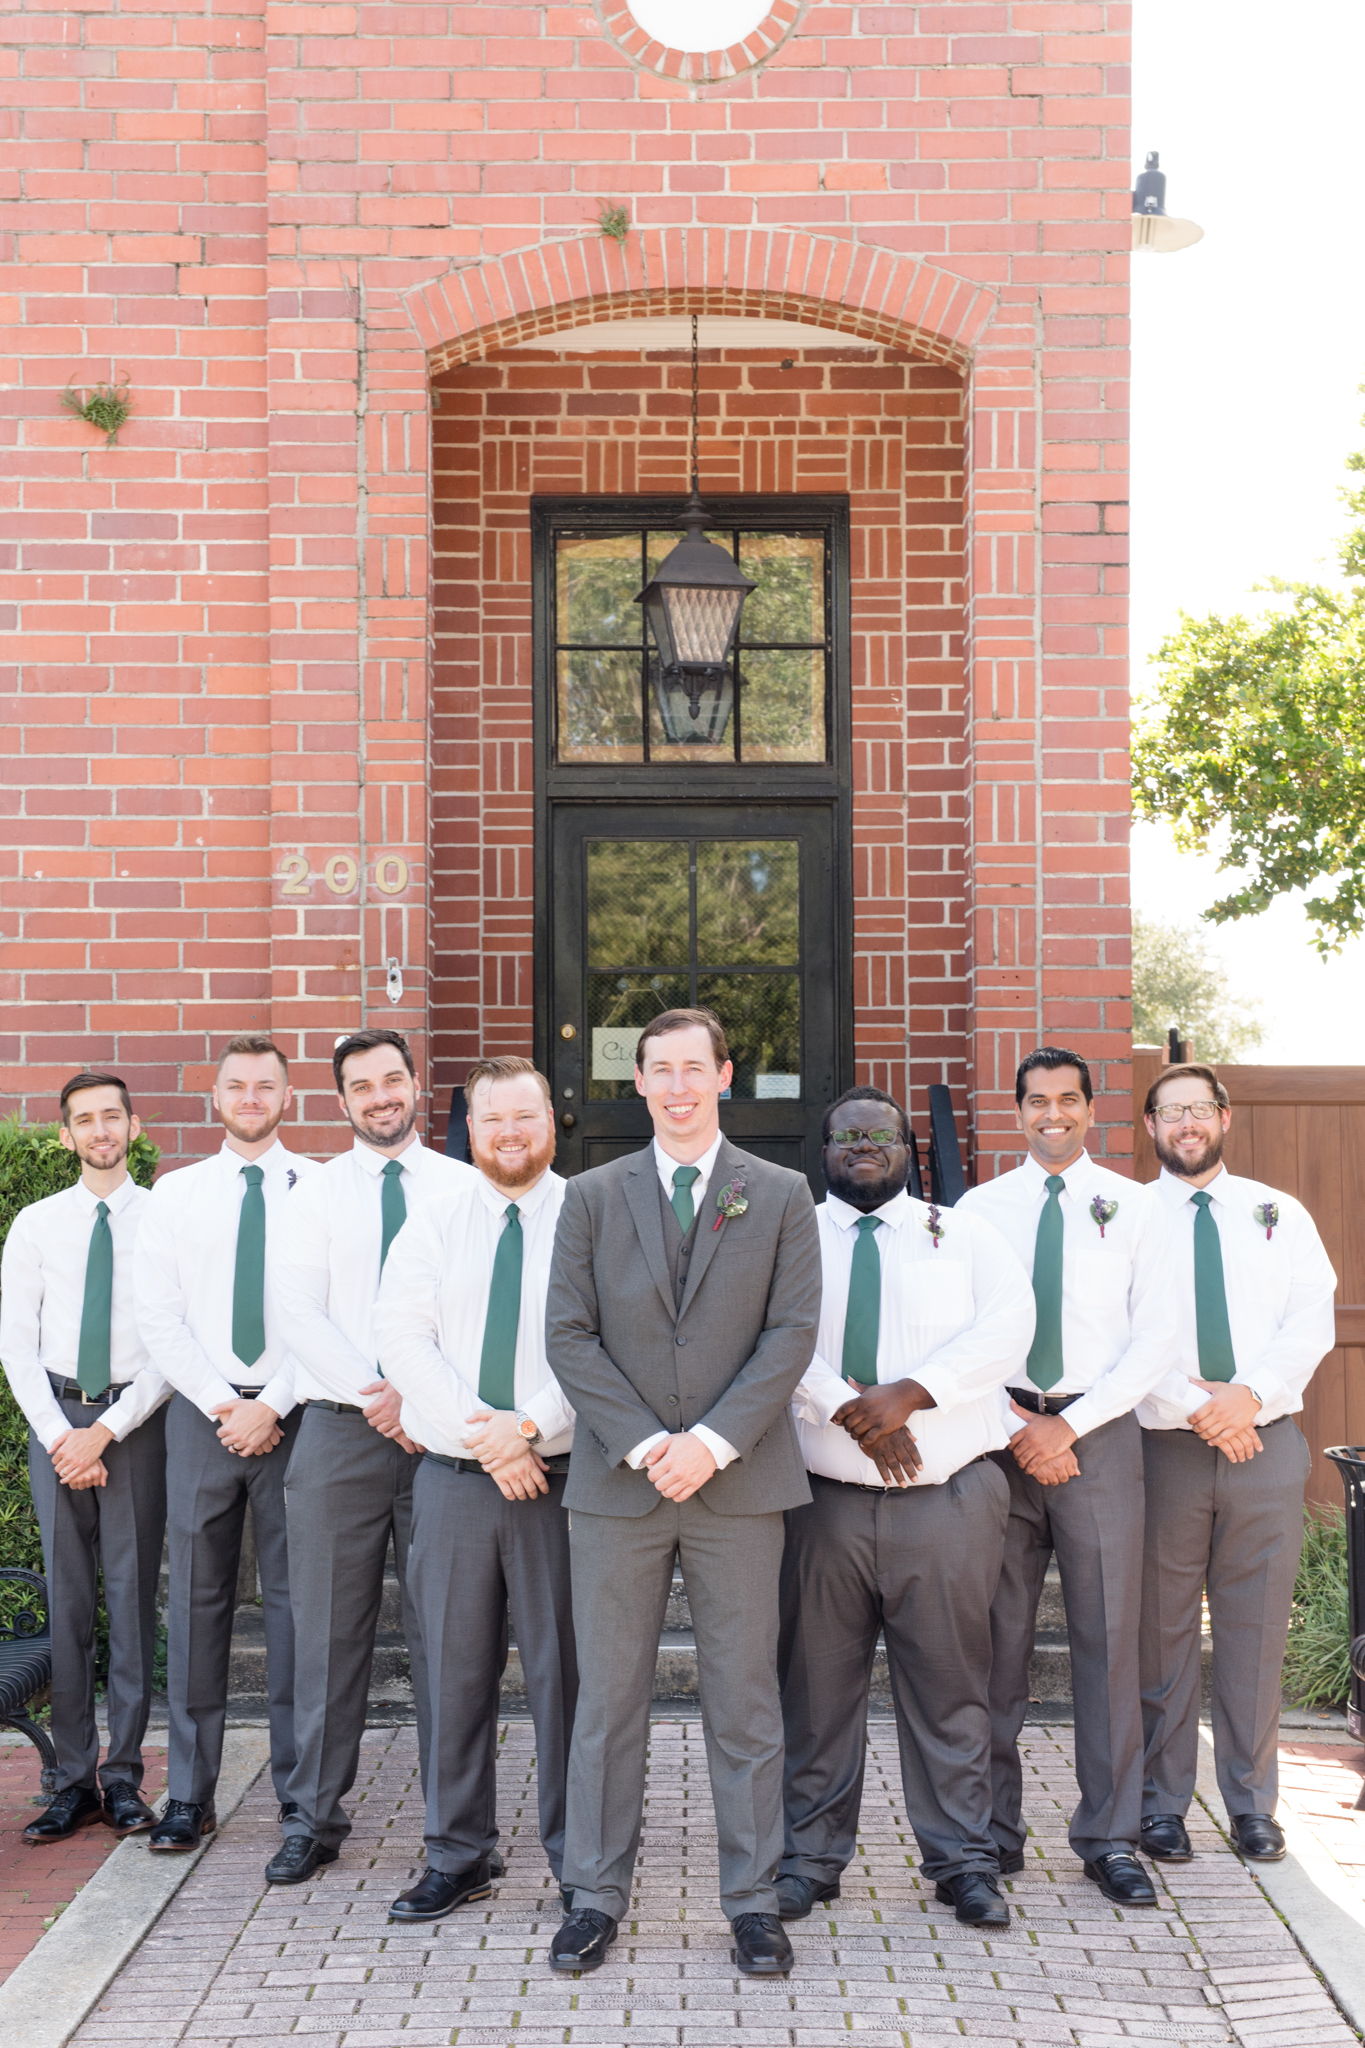 Groom and groomsmen stand together in front of venue.